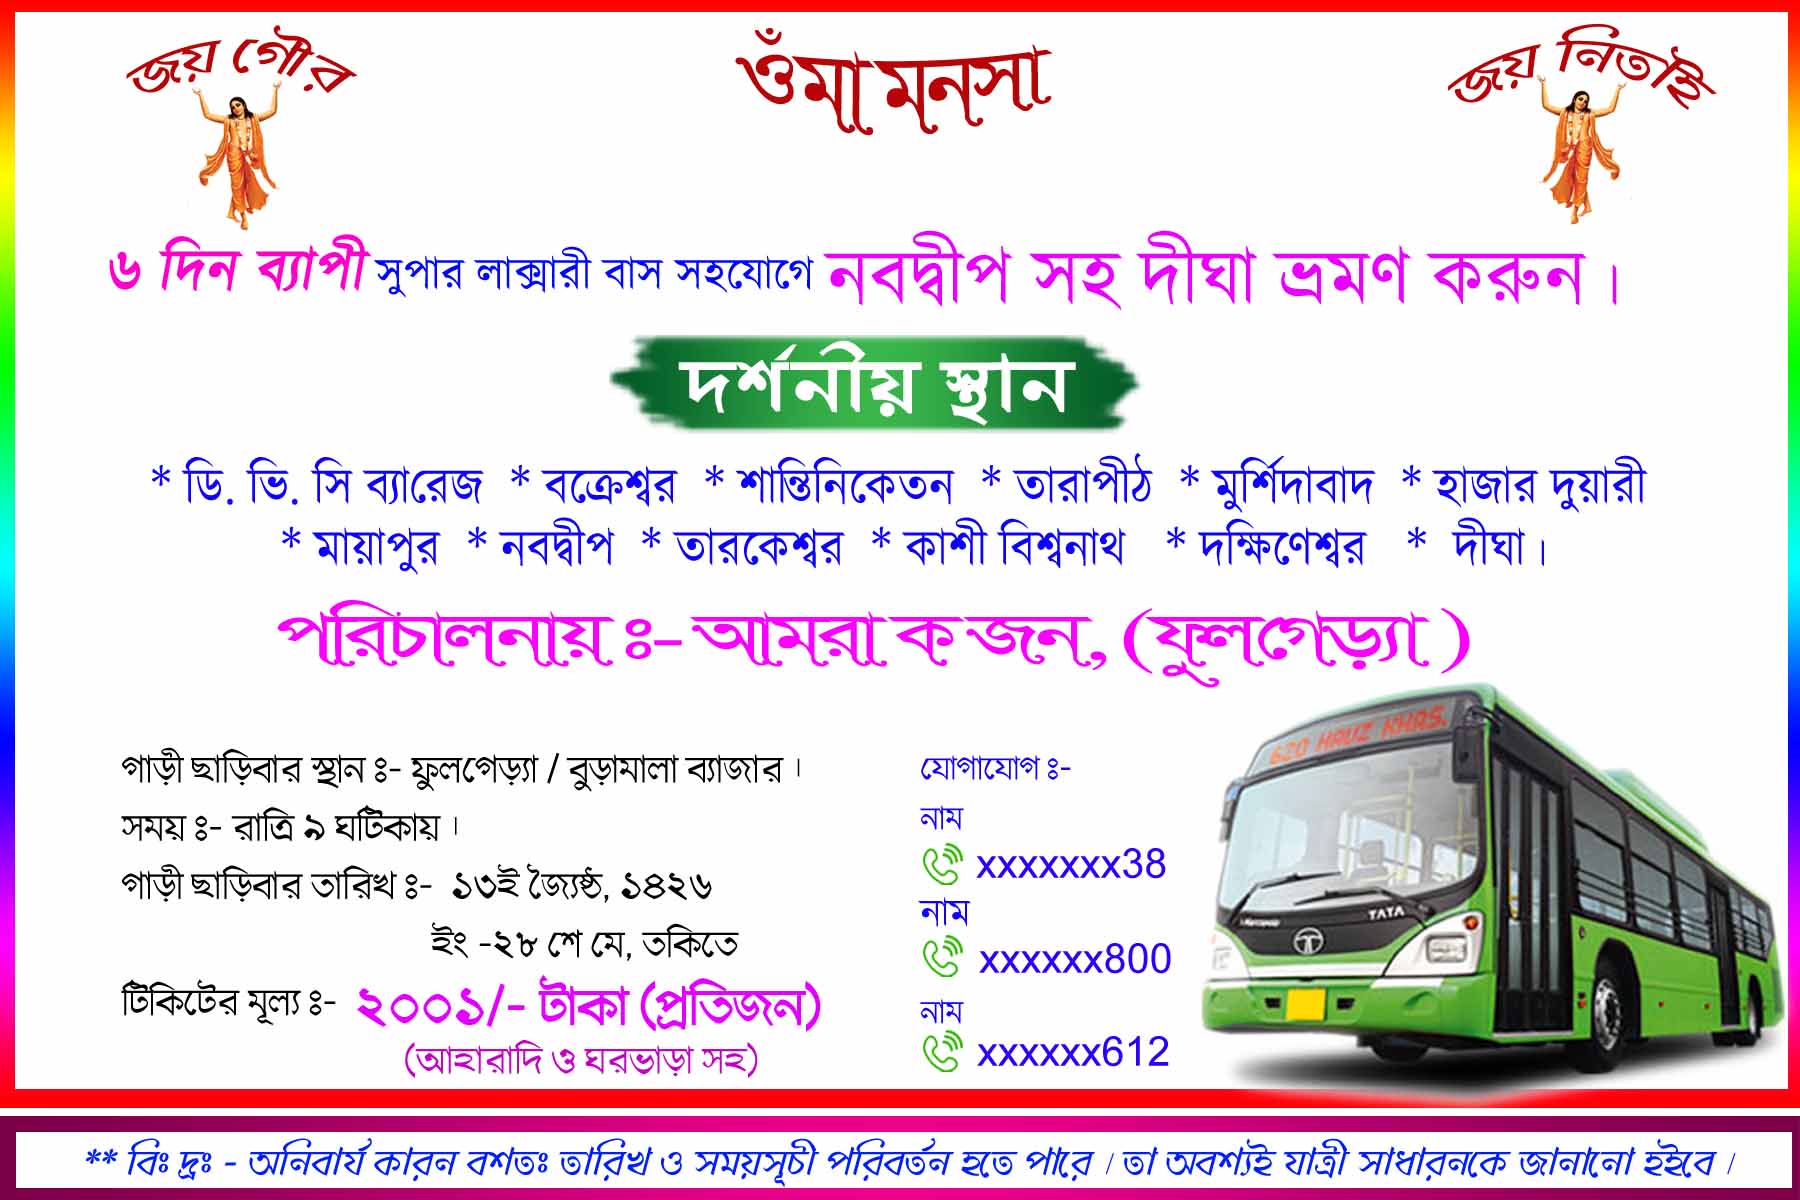 sponsored tour meaning in bengali